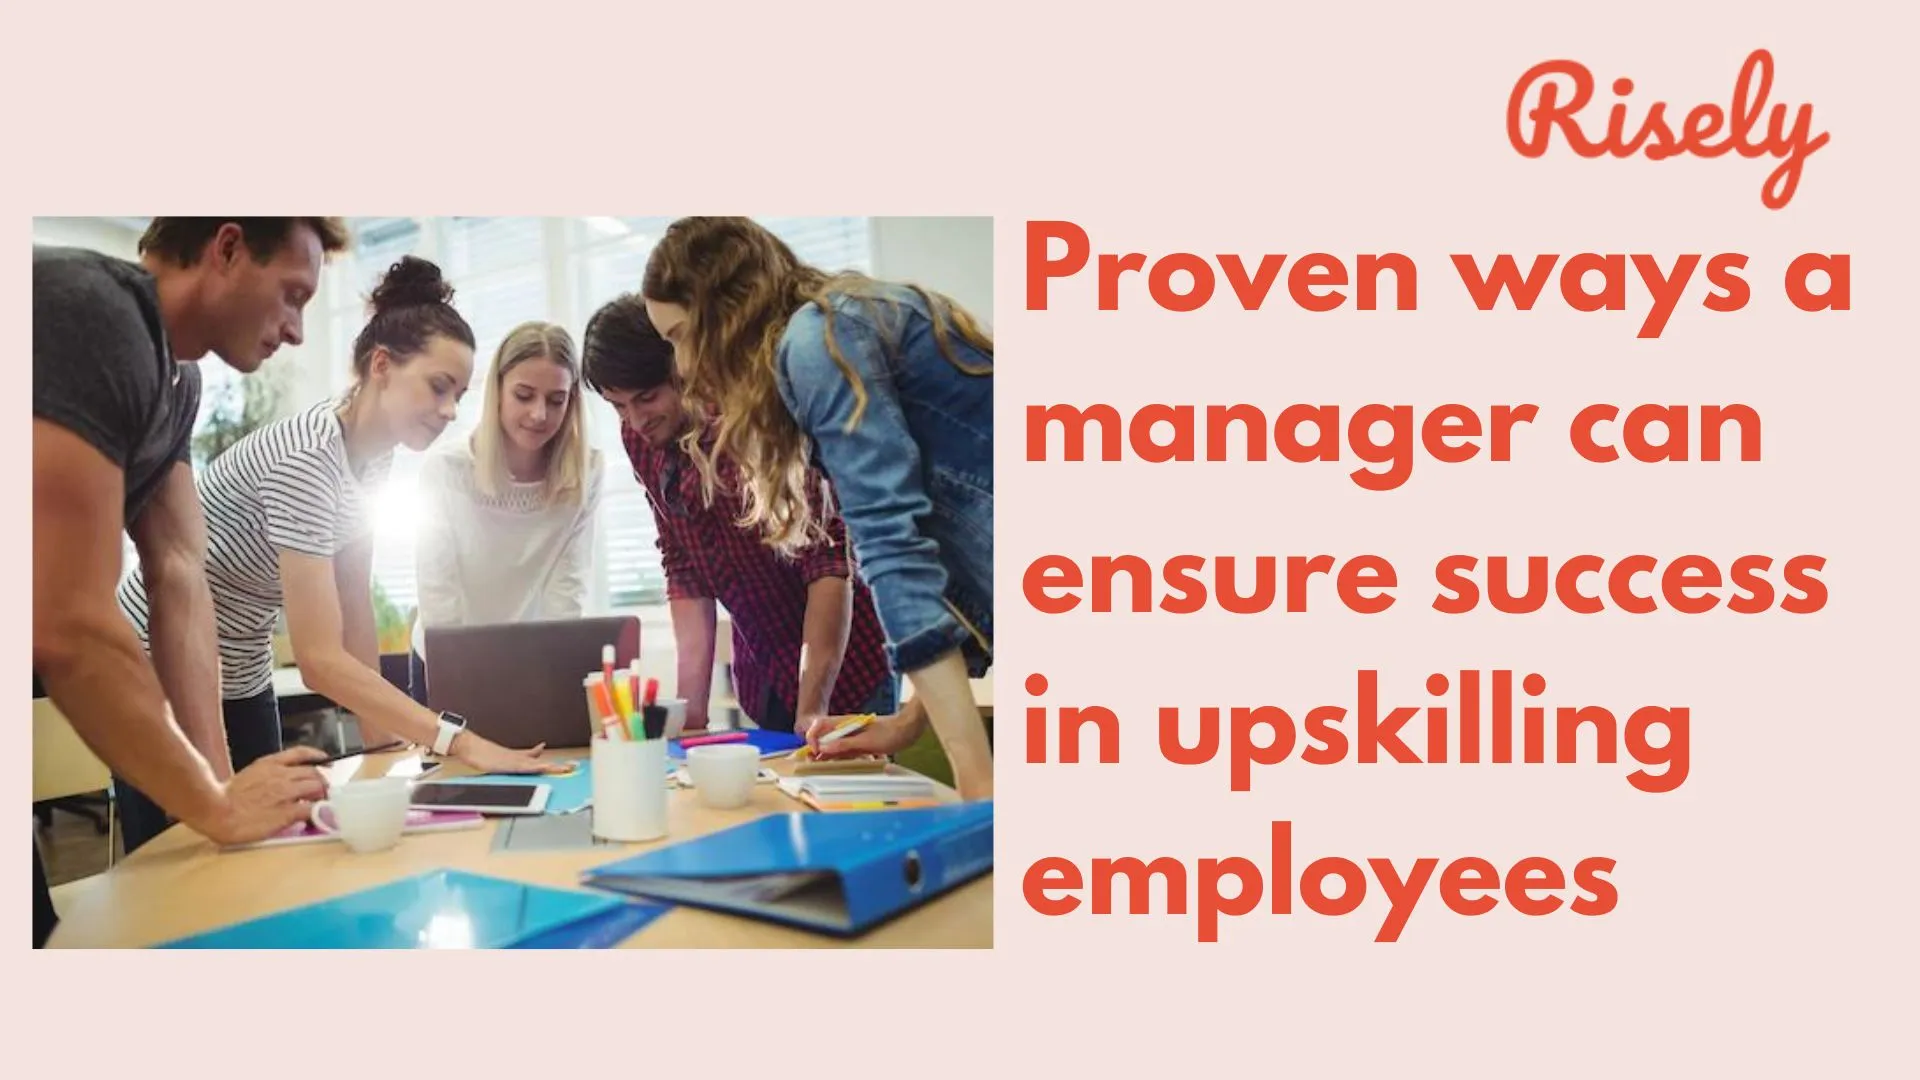 Proven ways a manager can ensure success in upskilling employees